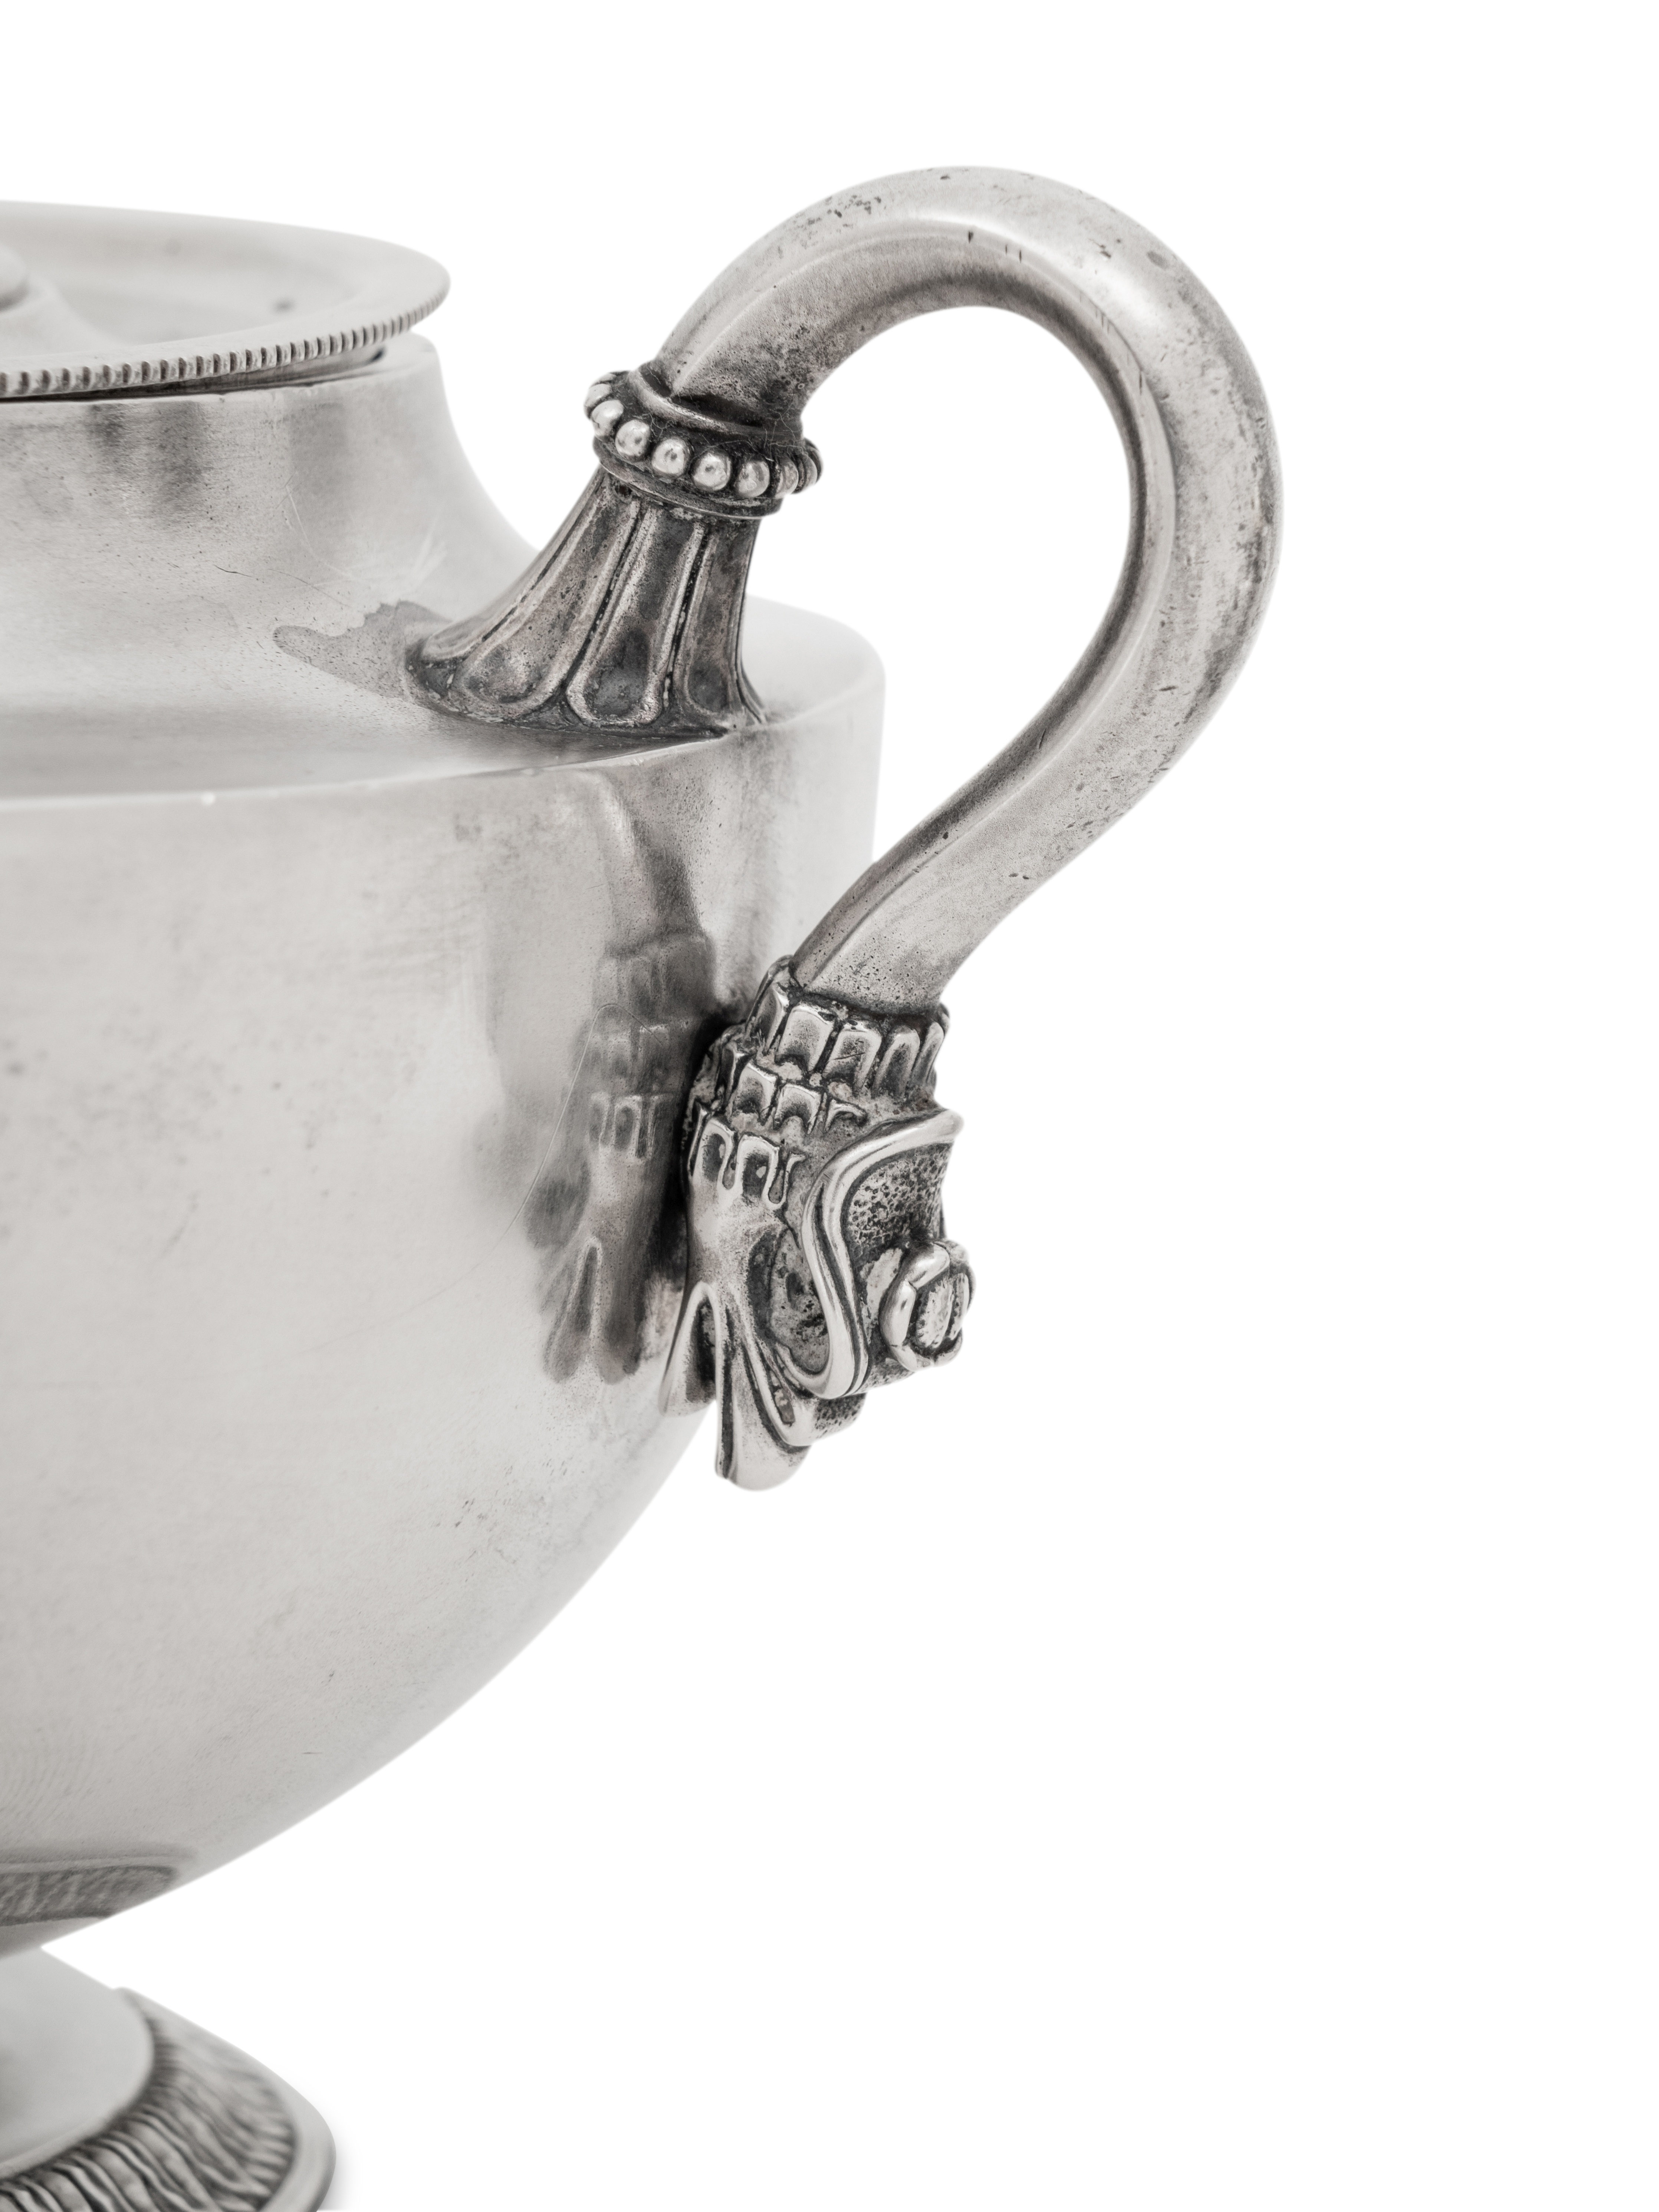 A Faberge Silver Creamer and Covered Sugar Set - Image 5 of 10